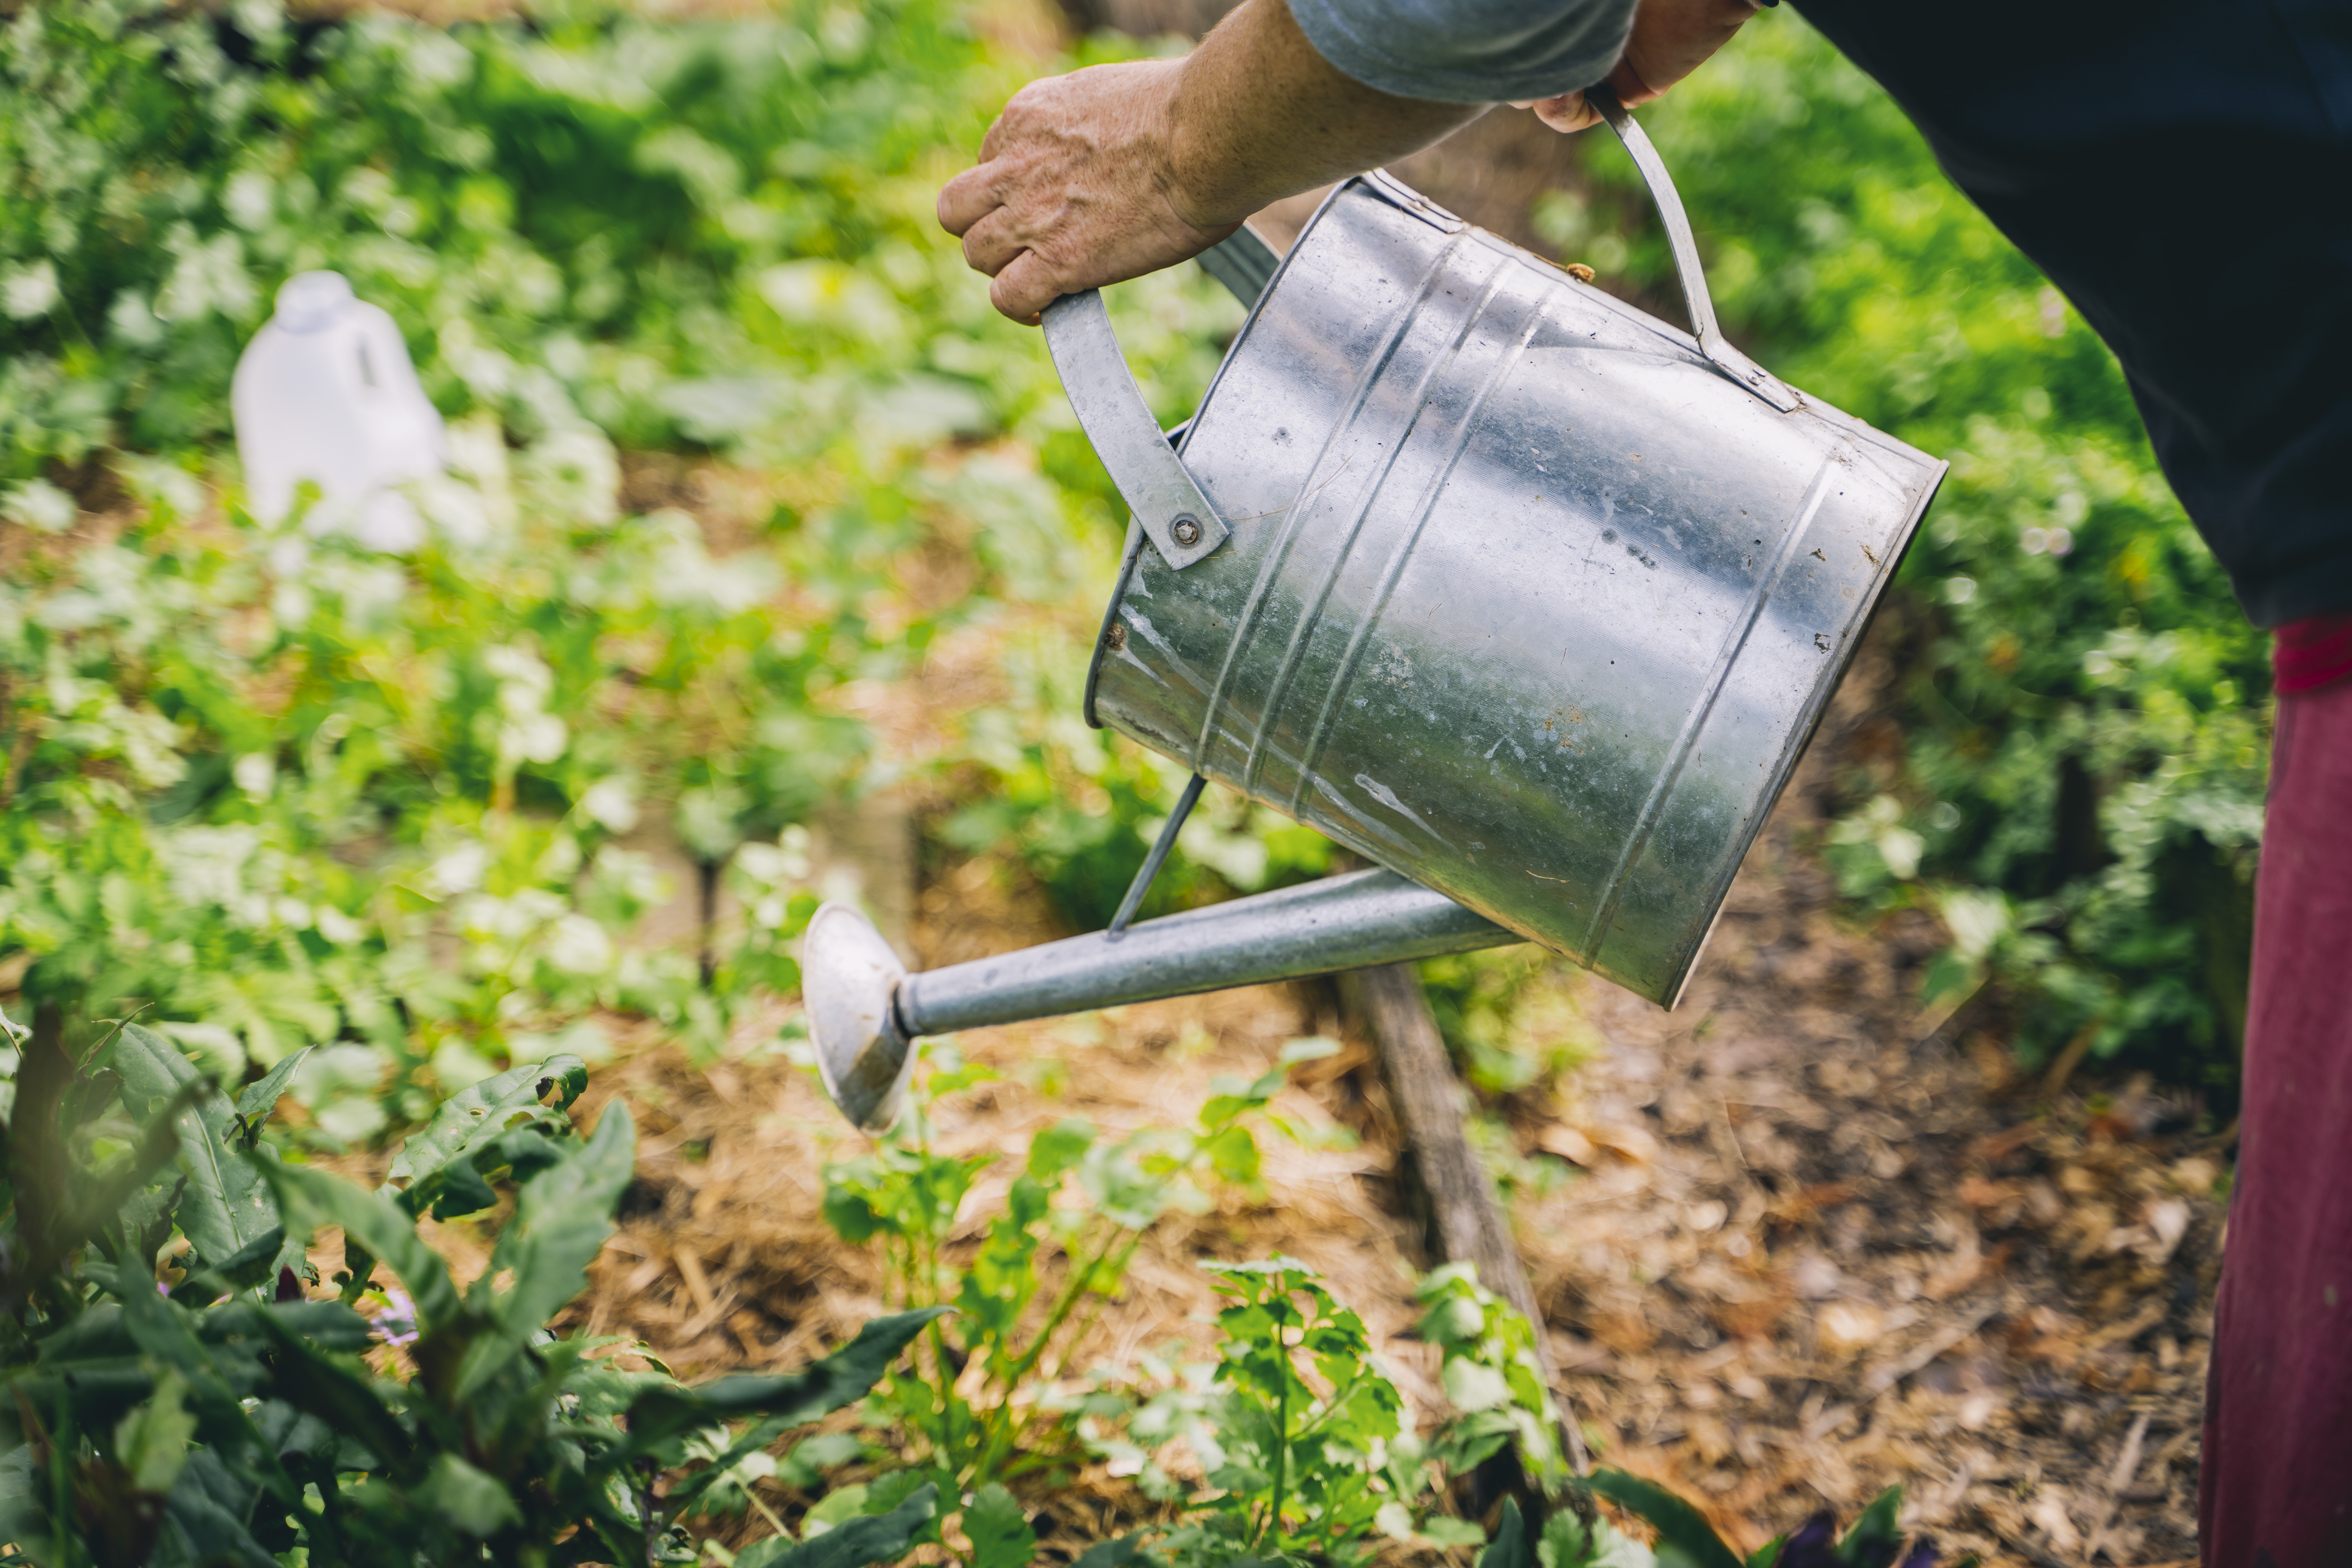 A person's hands hold a silver watering can and water a lush garden